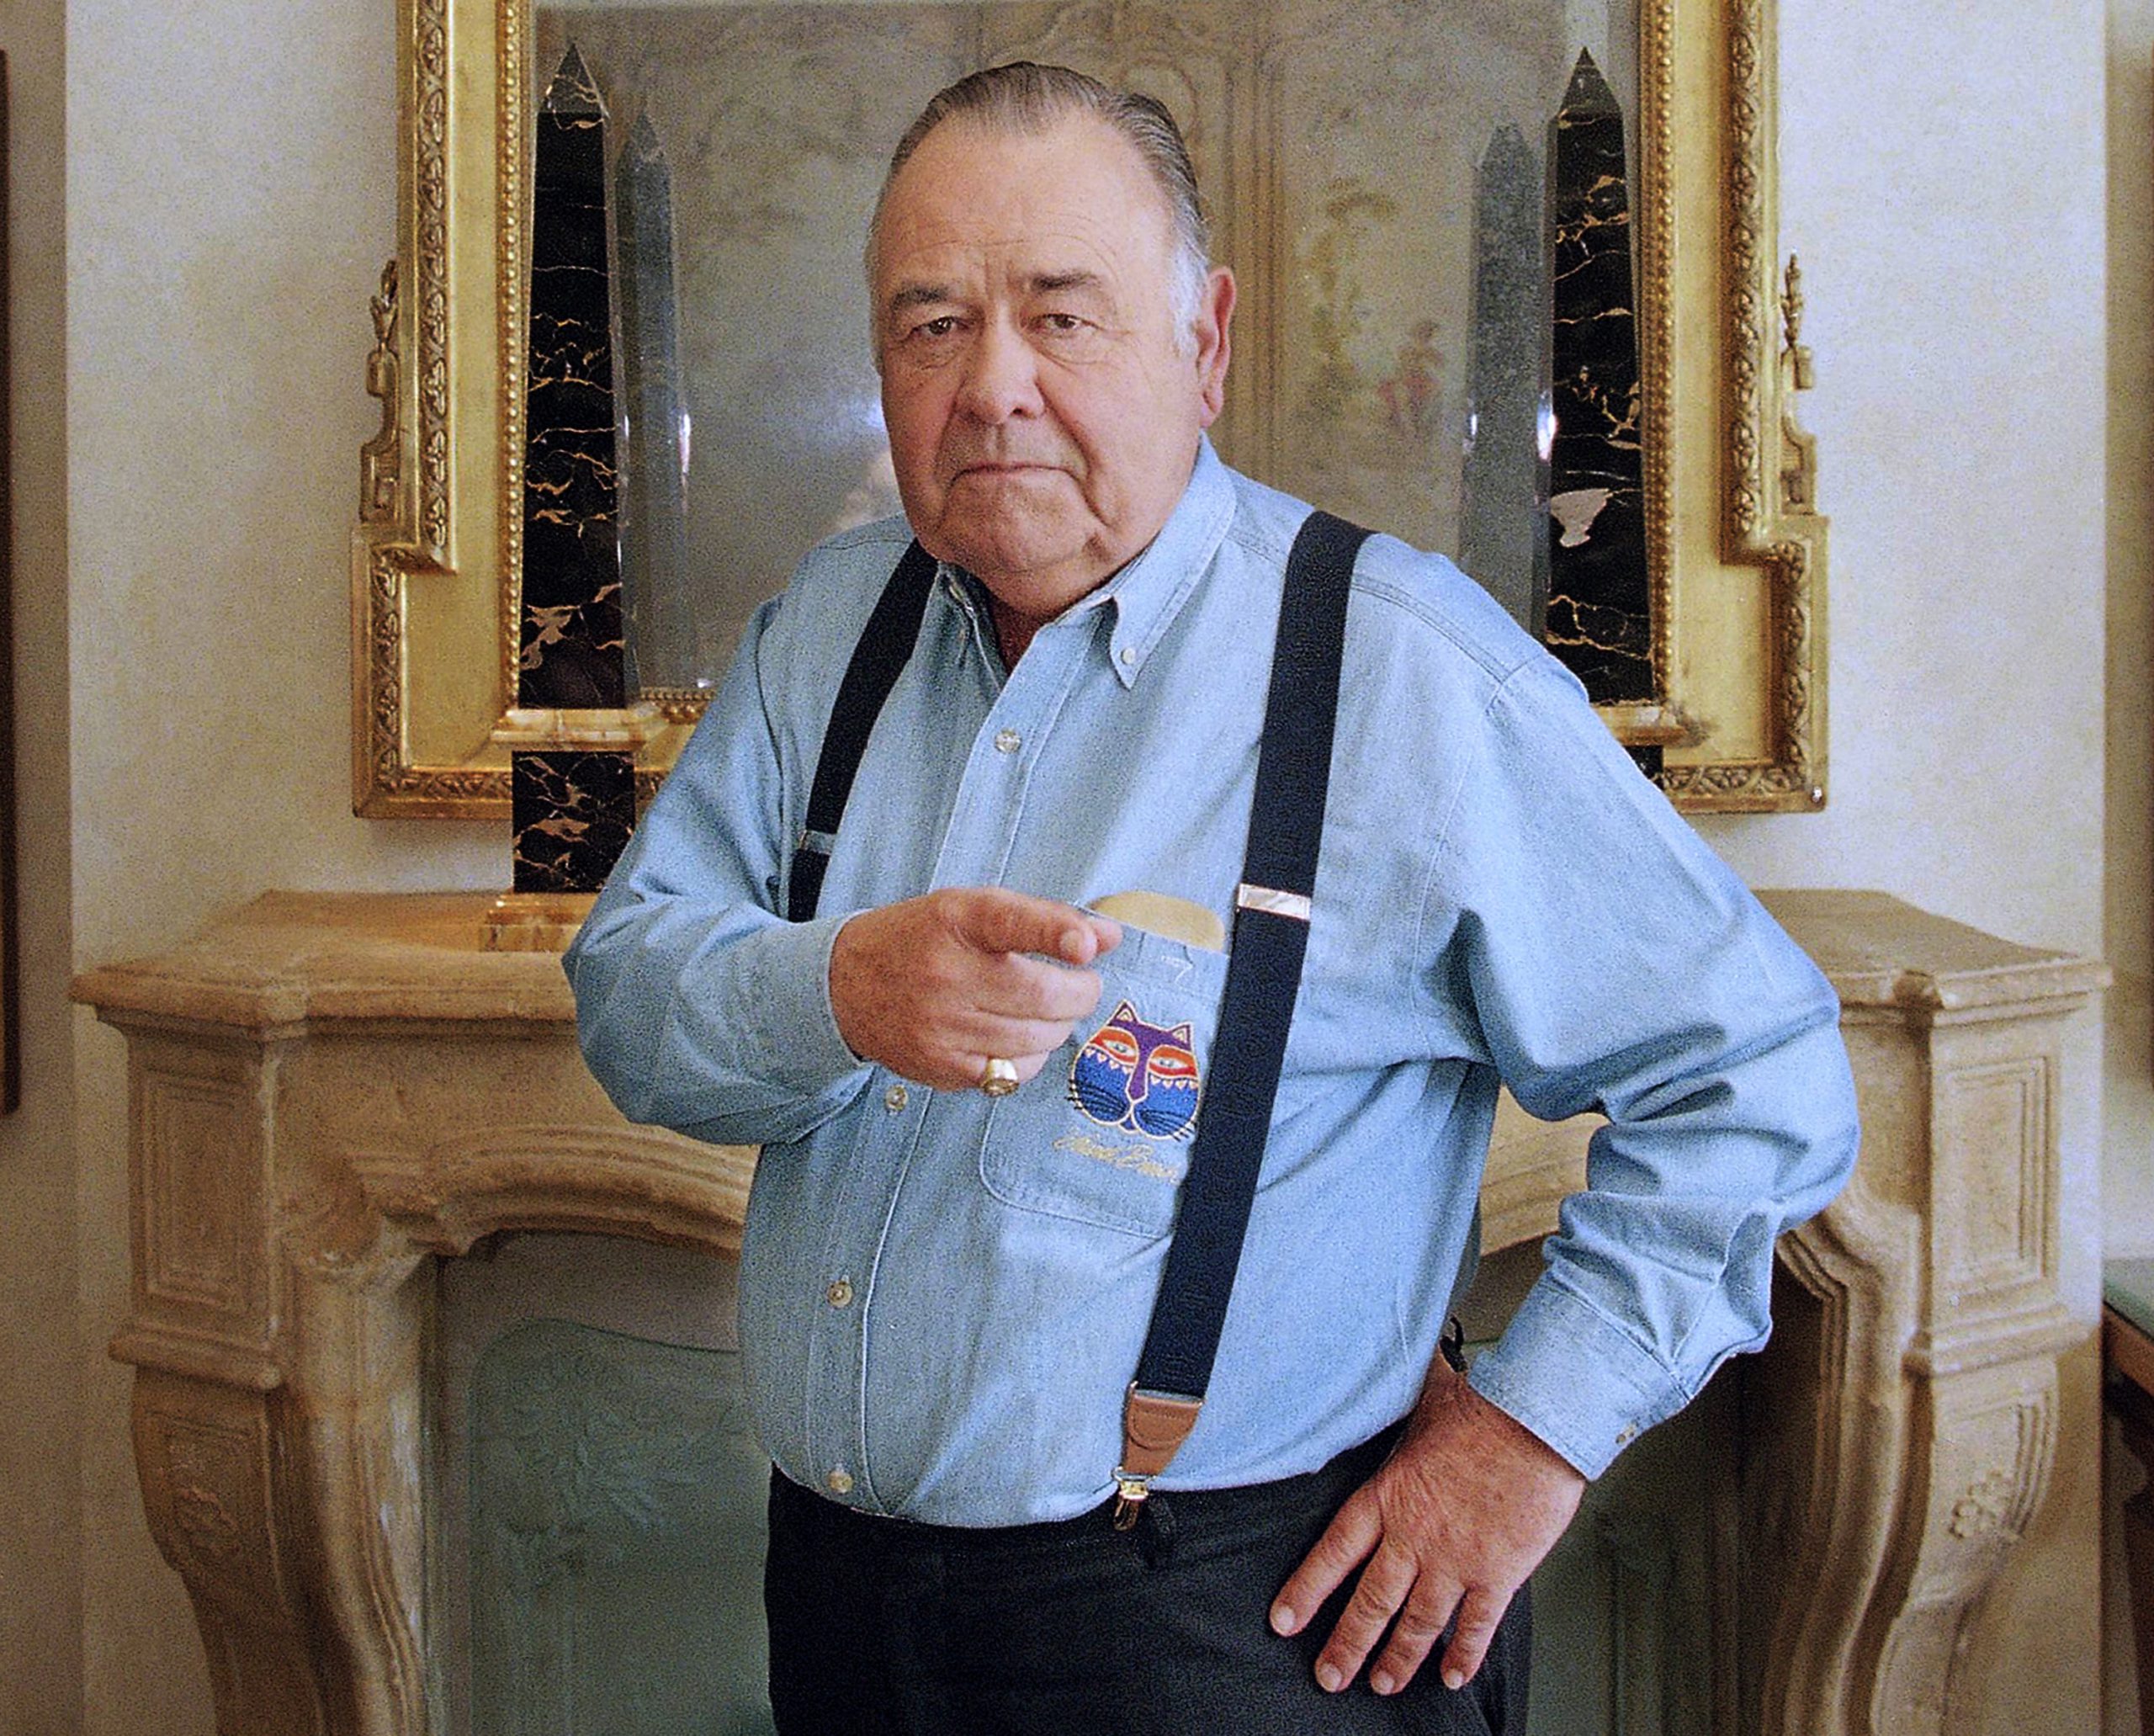 Details About Jonathan Winters: Net Worth, Death, Wife, Family